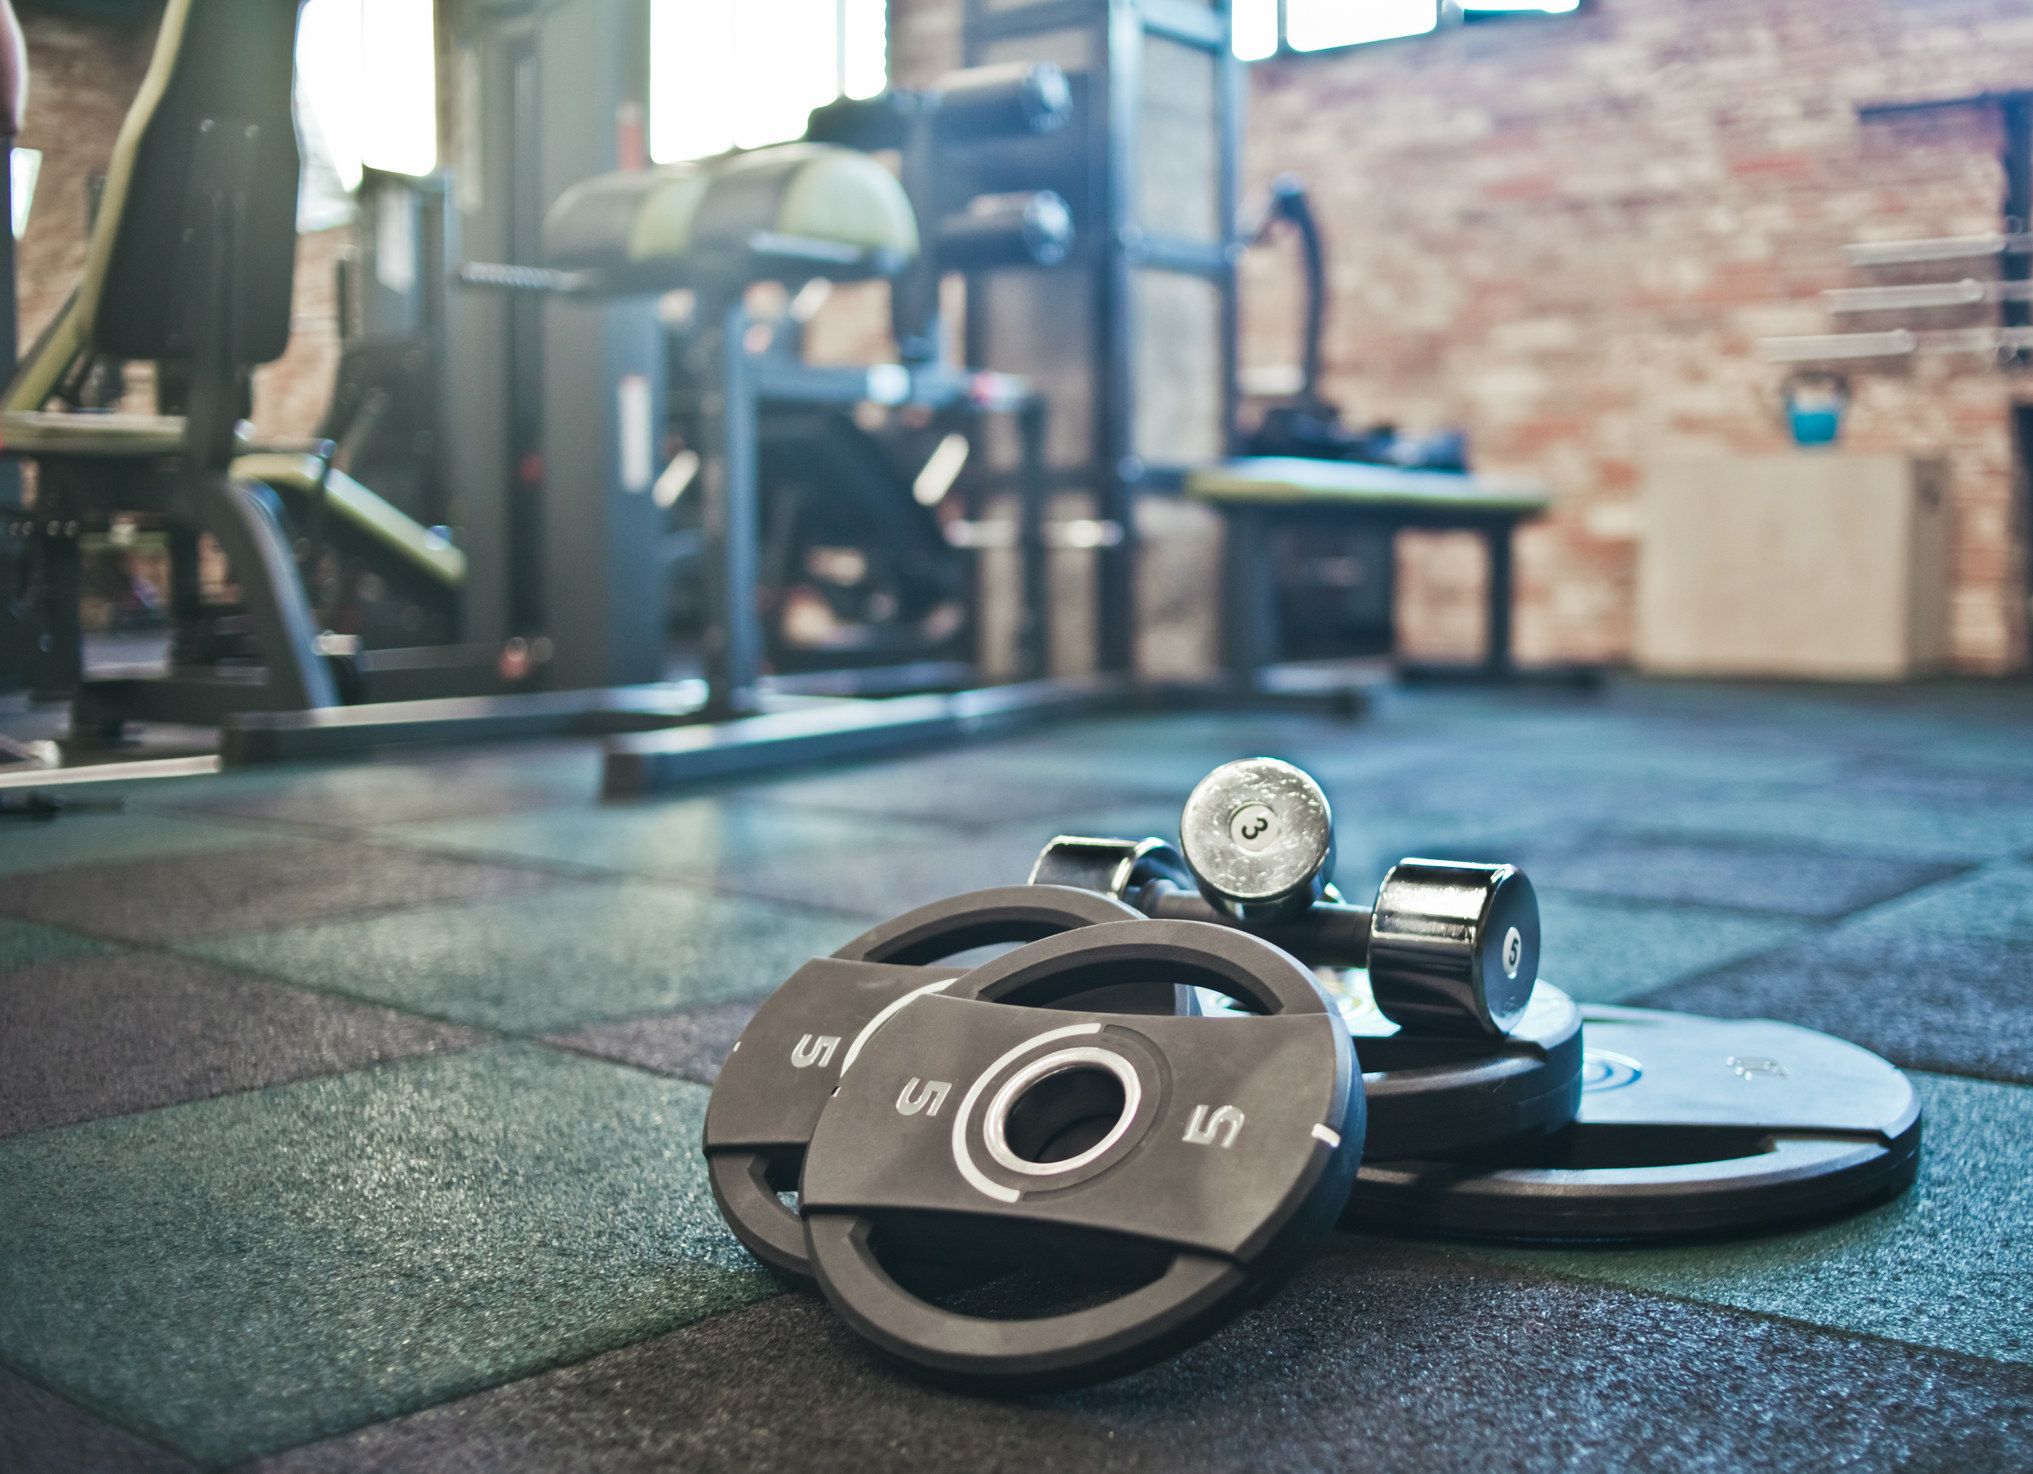 A stock image of a gym floor as a set of five pound weights lay on the ground beside workout machines